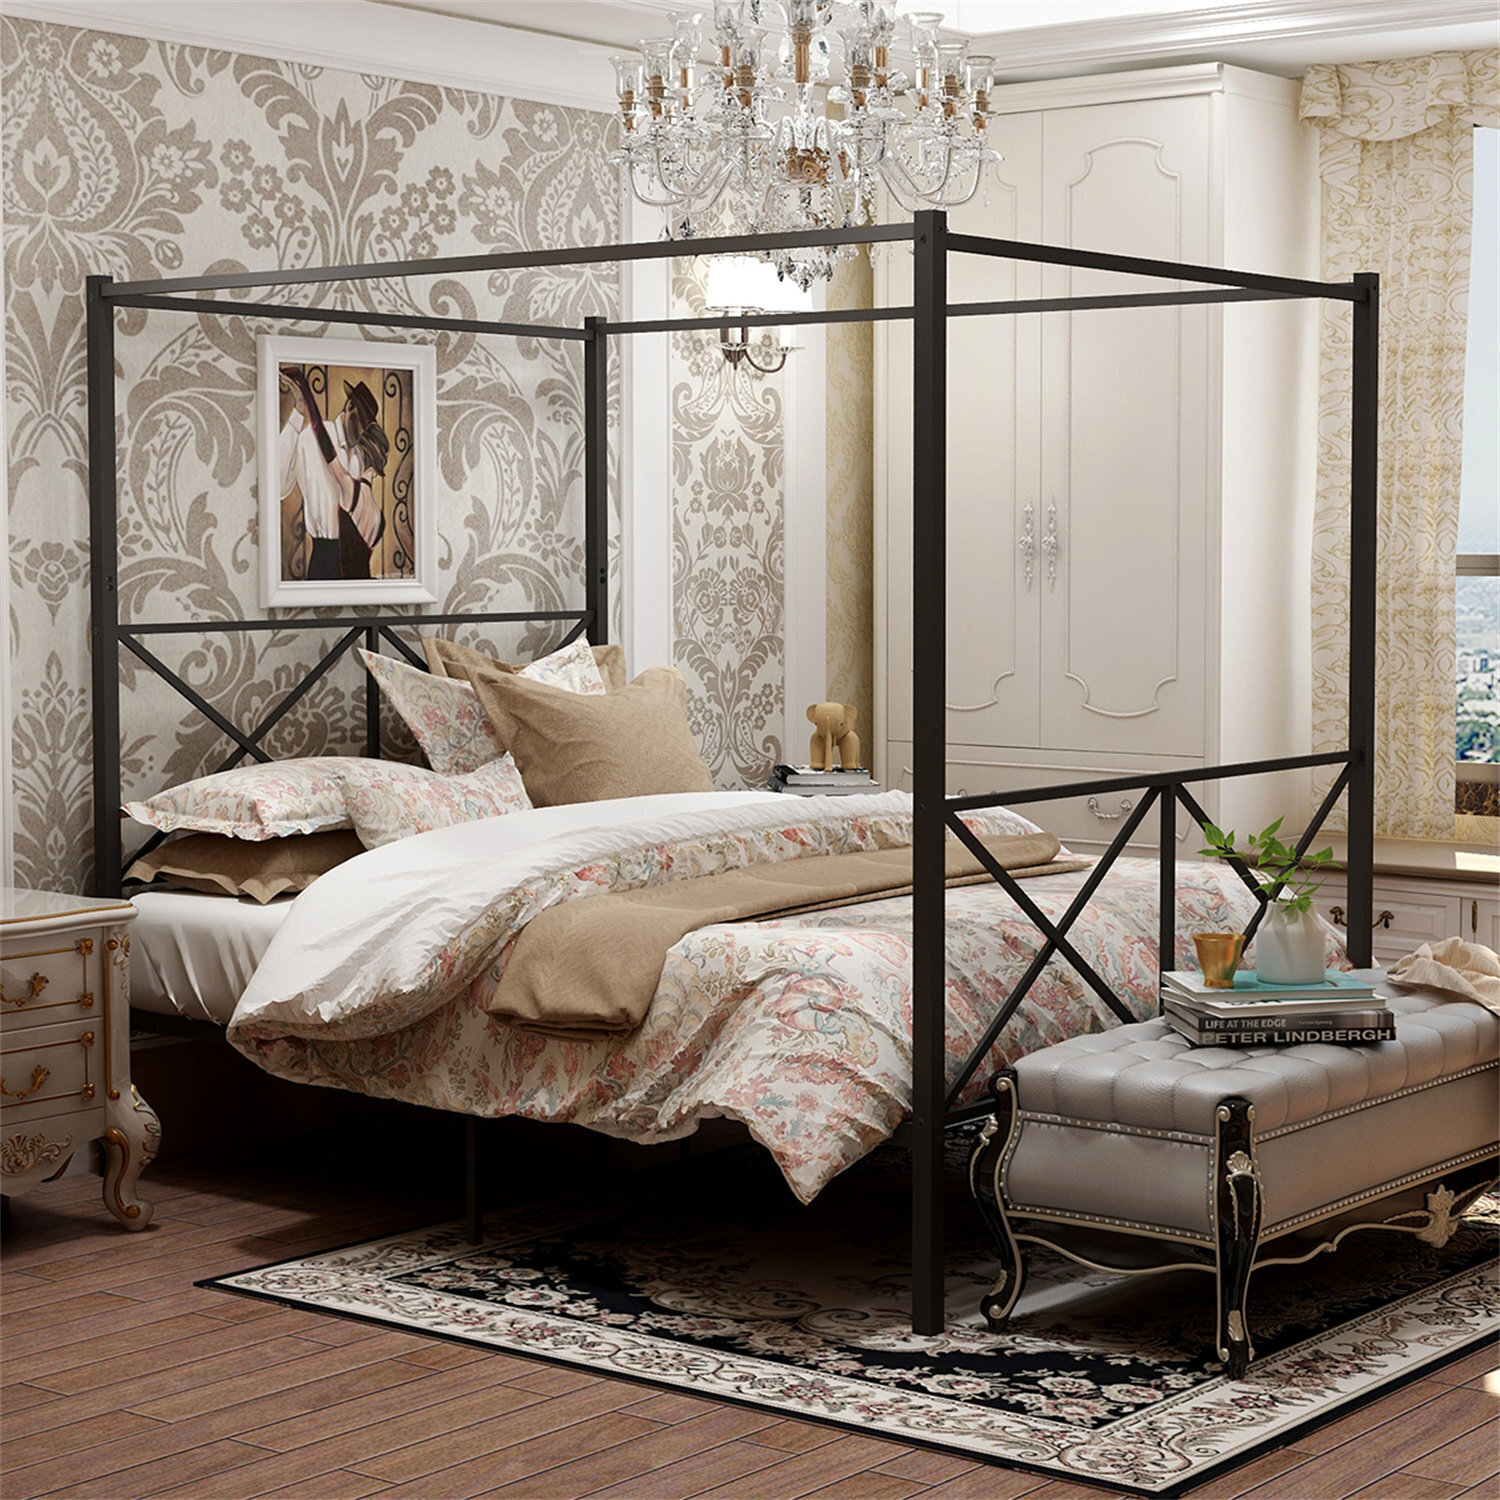 Thick, Black Geometric Frame With Footboard 